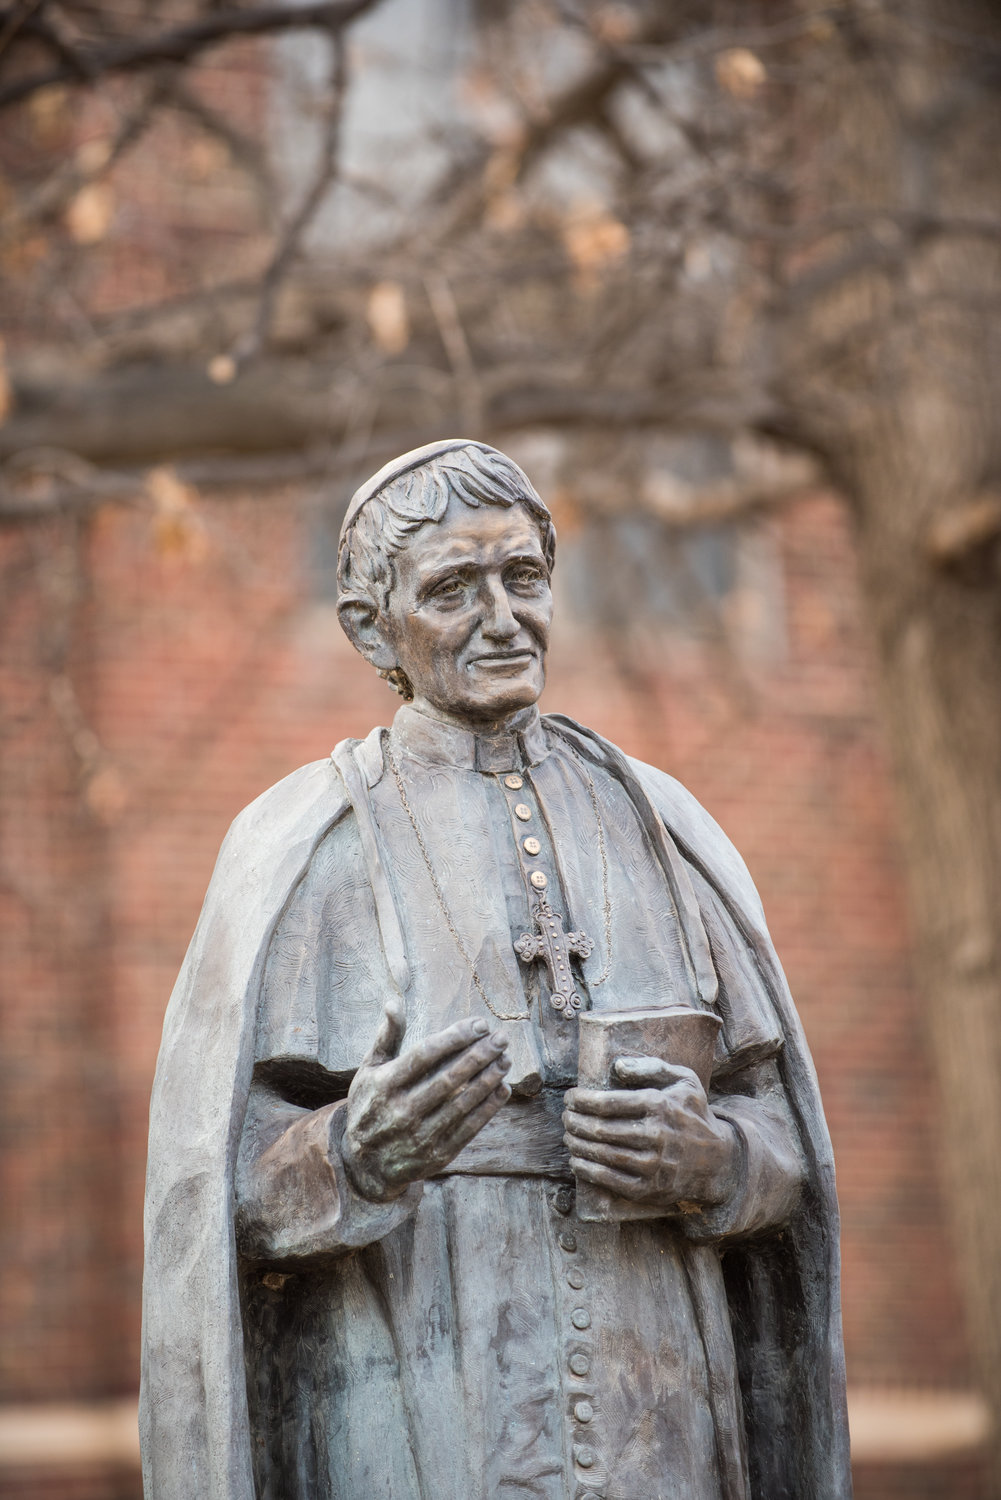 A statue of Blessed John Henry Newman is seen Feb. 5, 2018, on the campus of Newman University in Wichita, Kan. Many college Catholic student centers and Newman University, will be celebrating Cardinal Newman’s Oct. 13, 2019, canonization with lectures, watch parties and pilgrimages to Rome for the event.